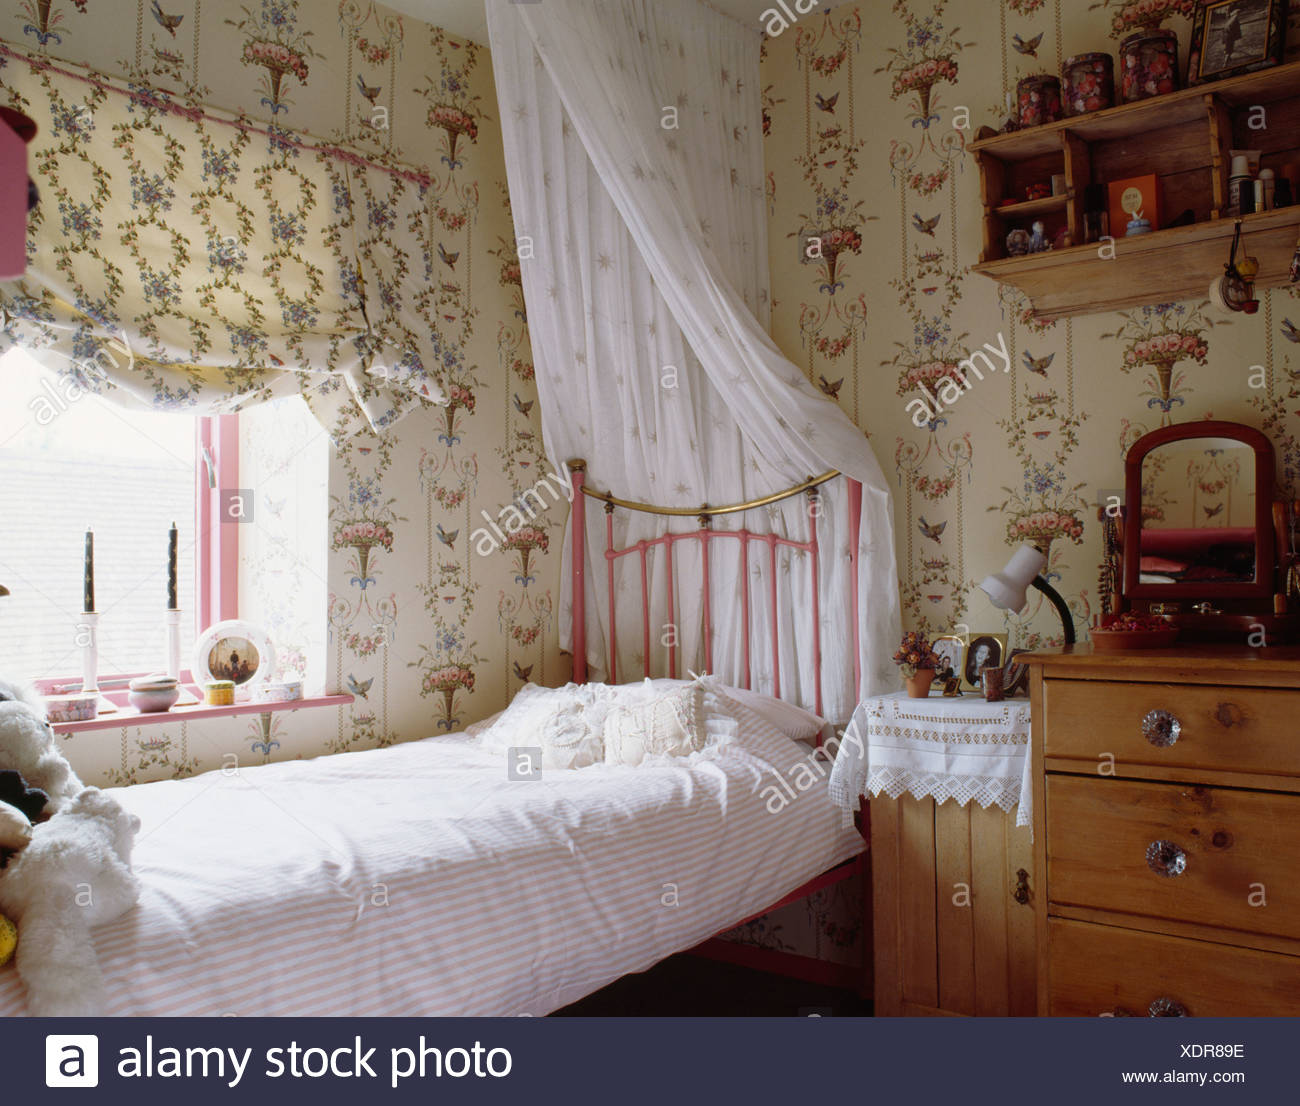 Patterned Wallpaper And Blind In Teenager Girls Bedroom With